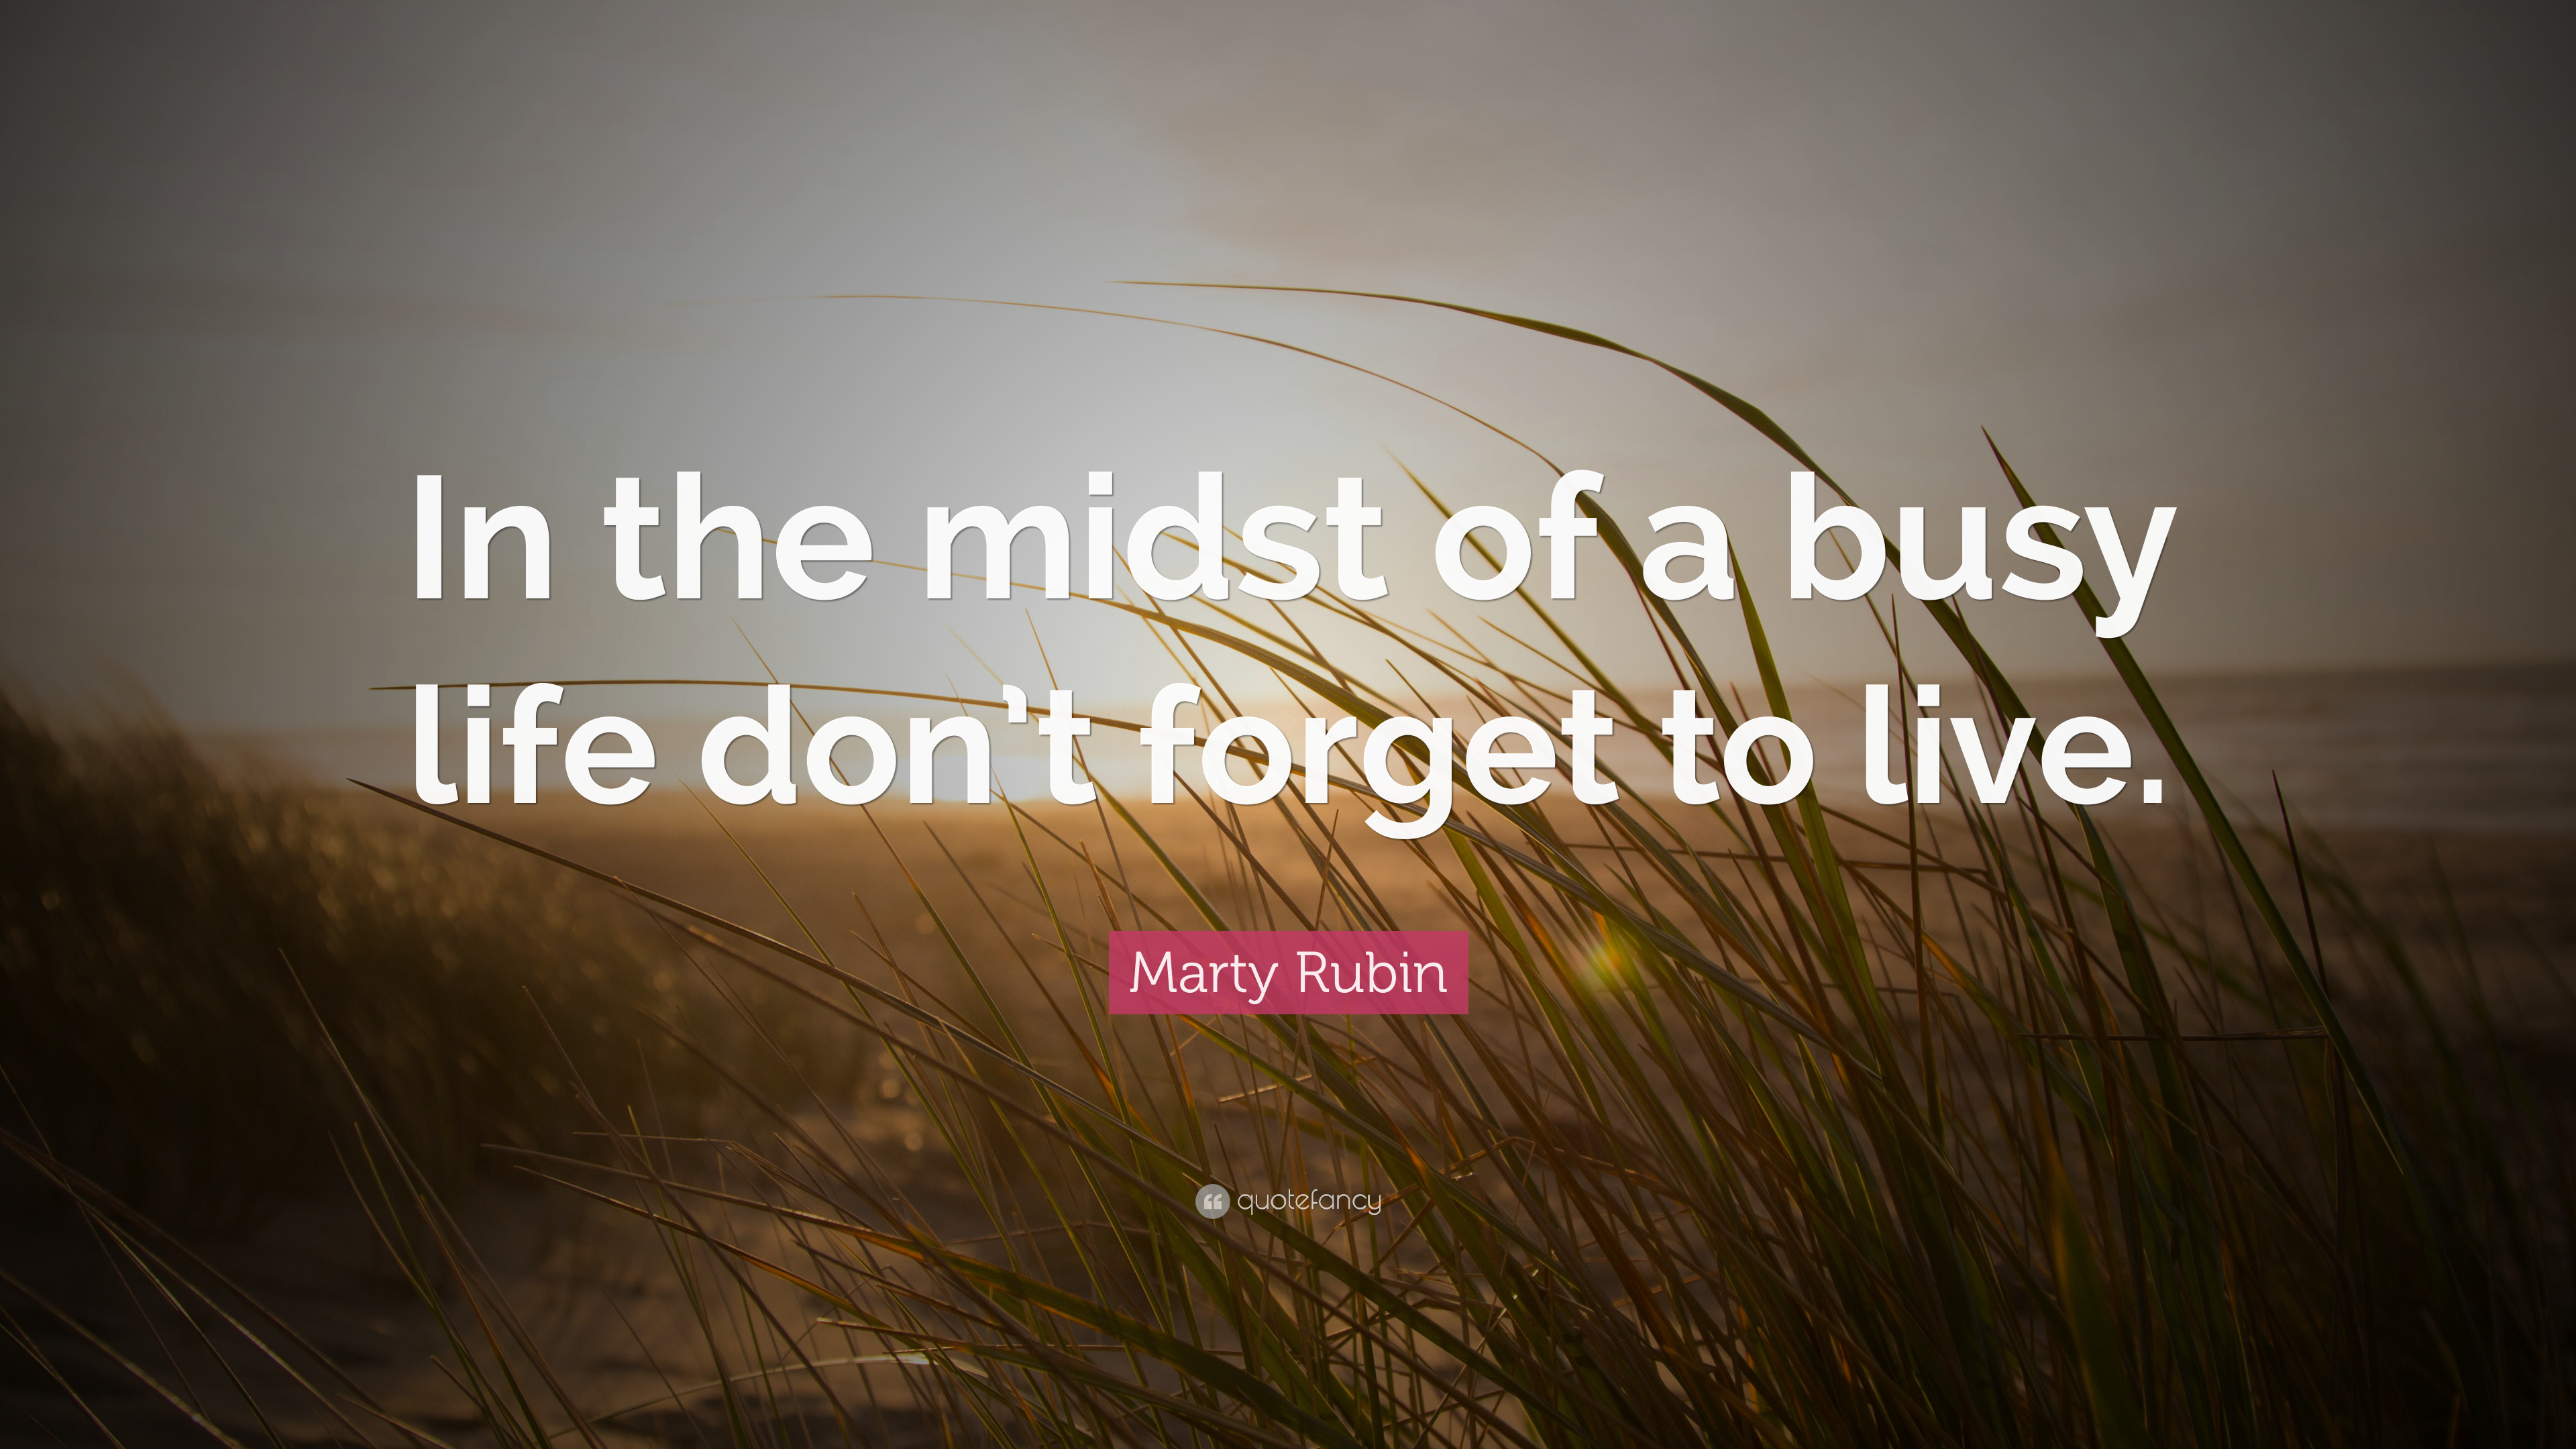 Marty Rubin Quote: “In the midst of a busy life don't forget to live.”